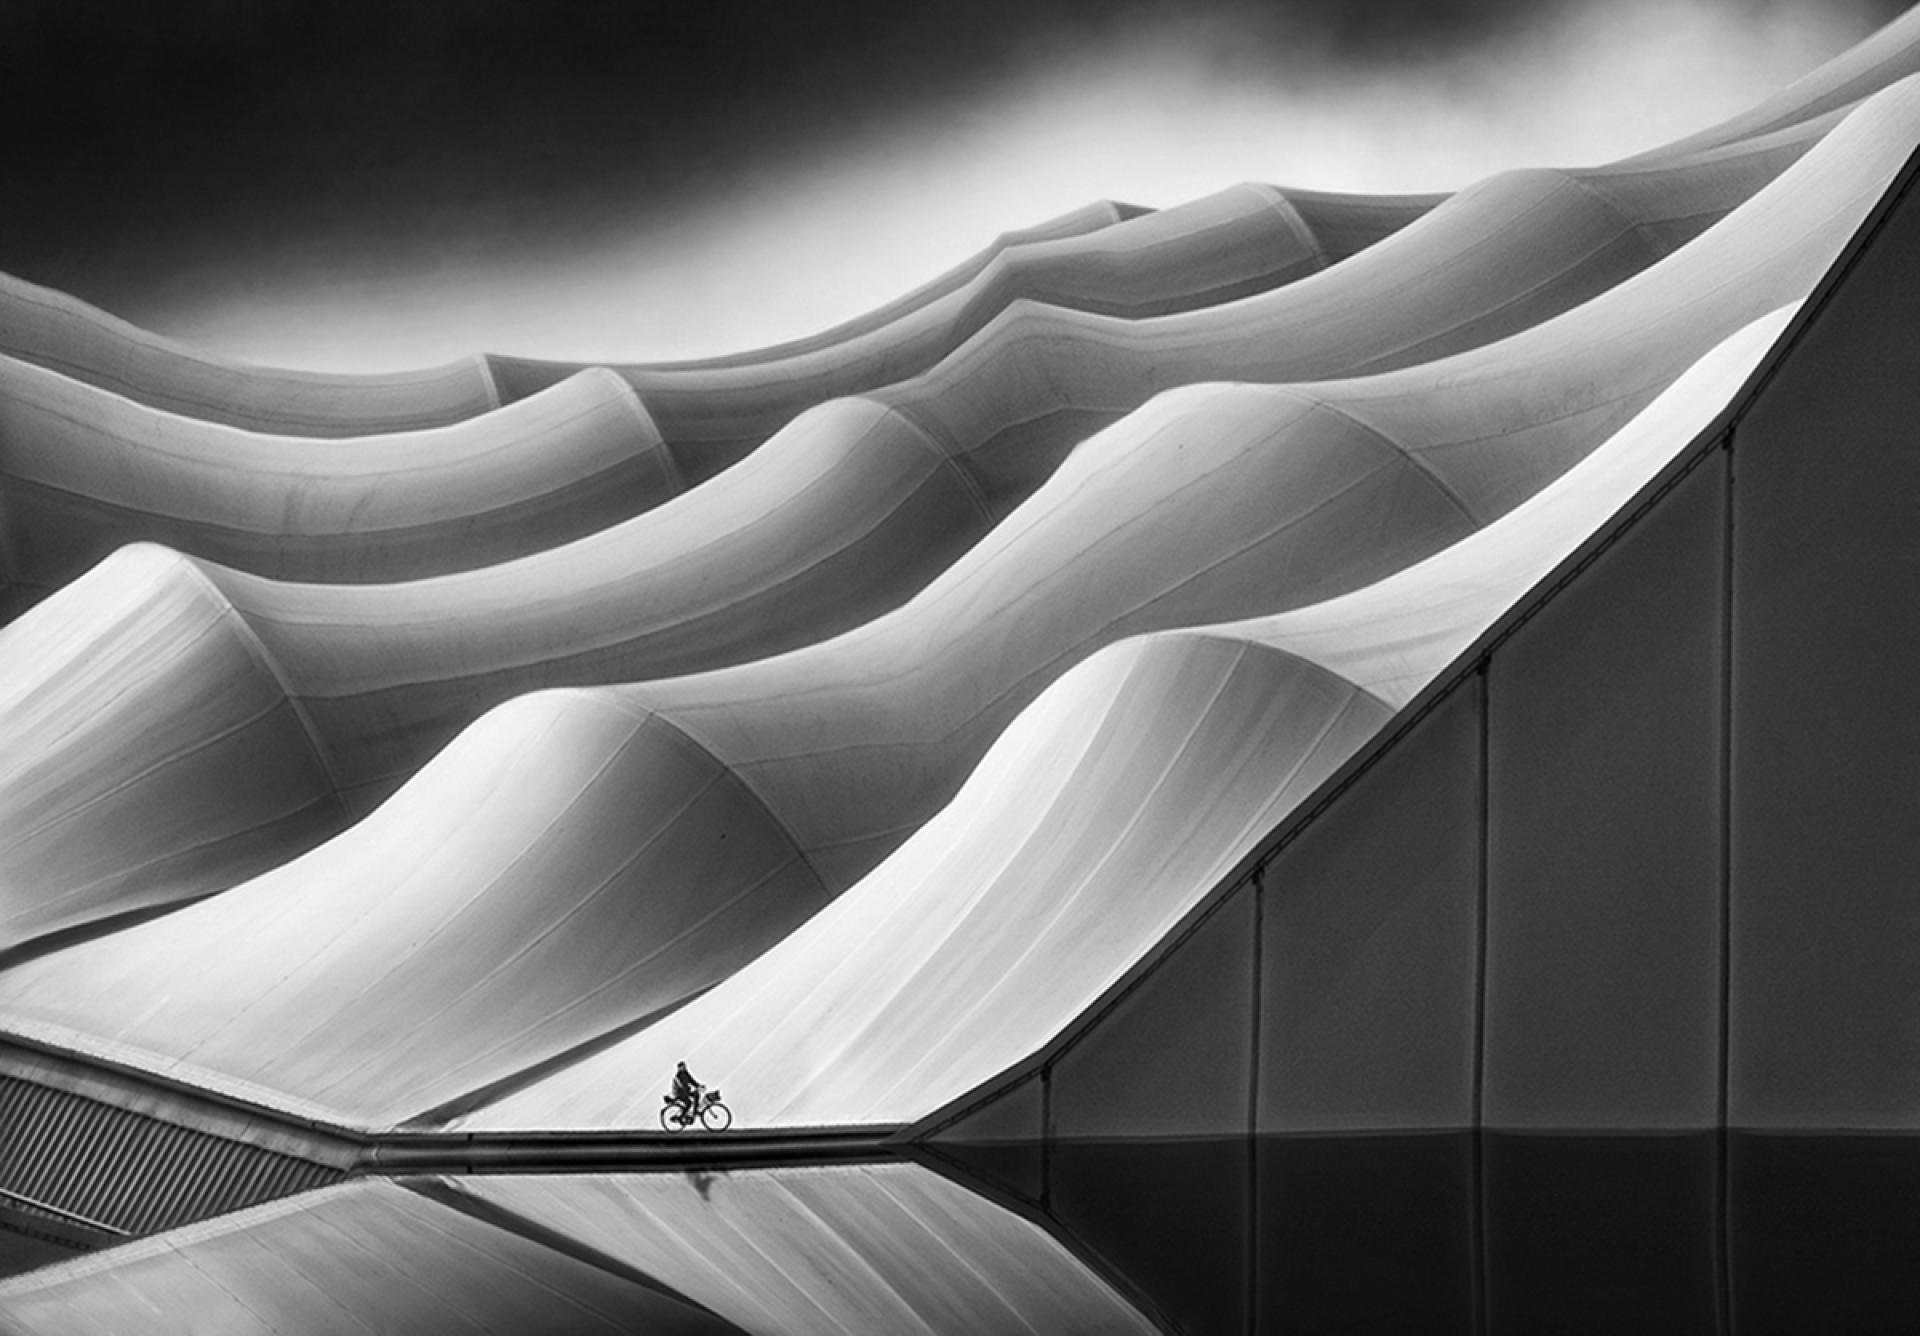 London Photography Awards Winner - The insignificance of man 